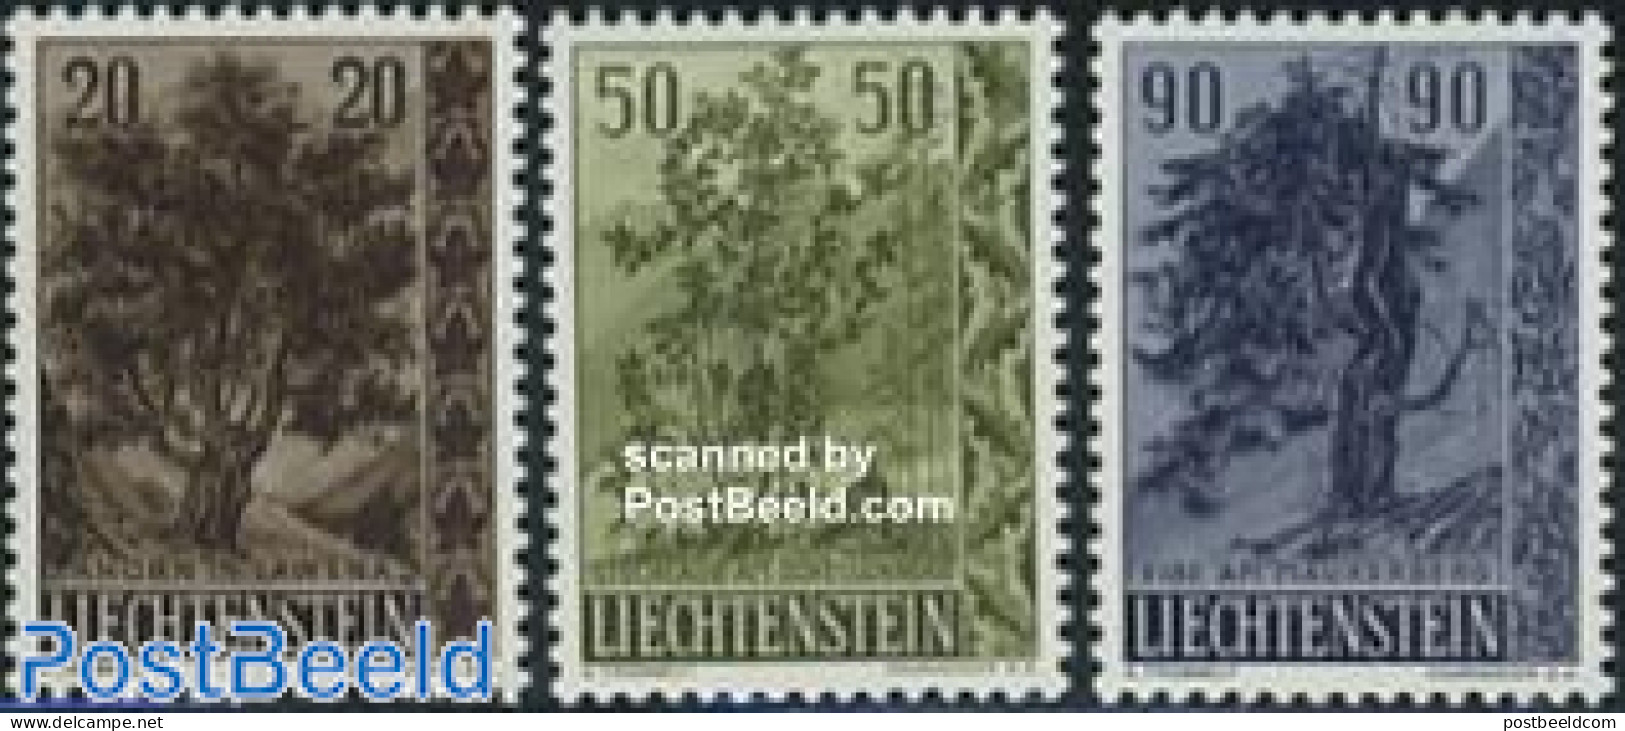 Liechtenstein 1958 Trees 3v, Mint NH, Nature - Trees & Forests - Unused Stamps